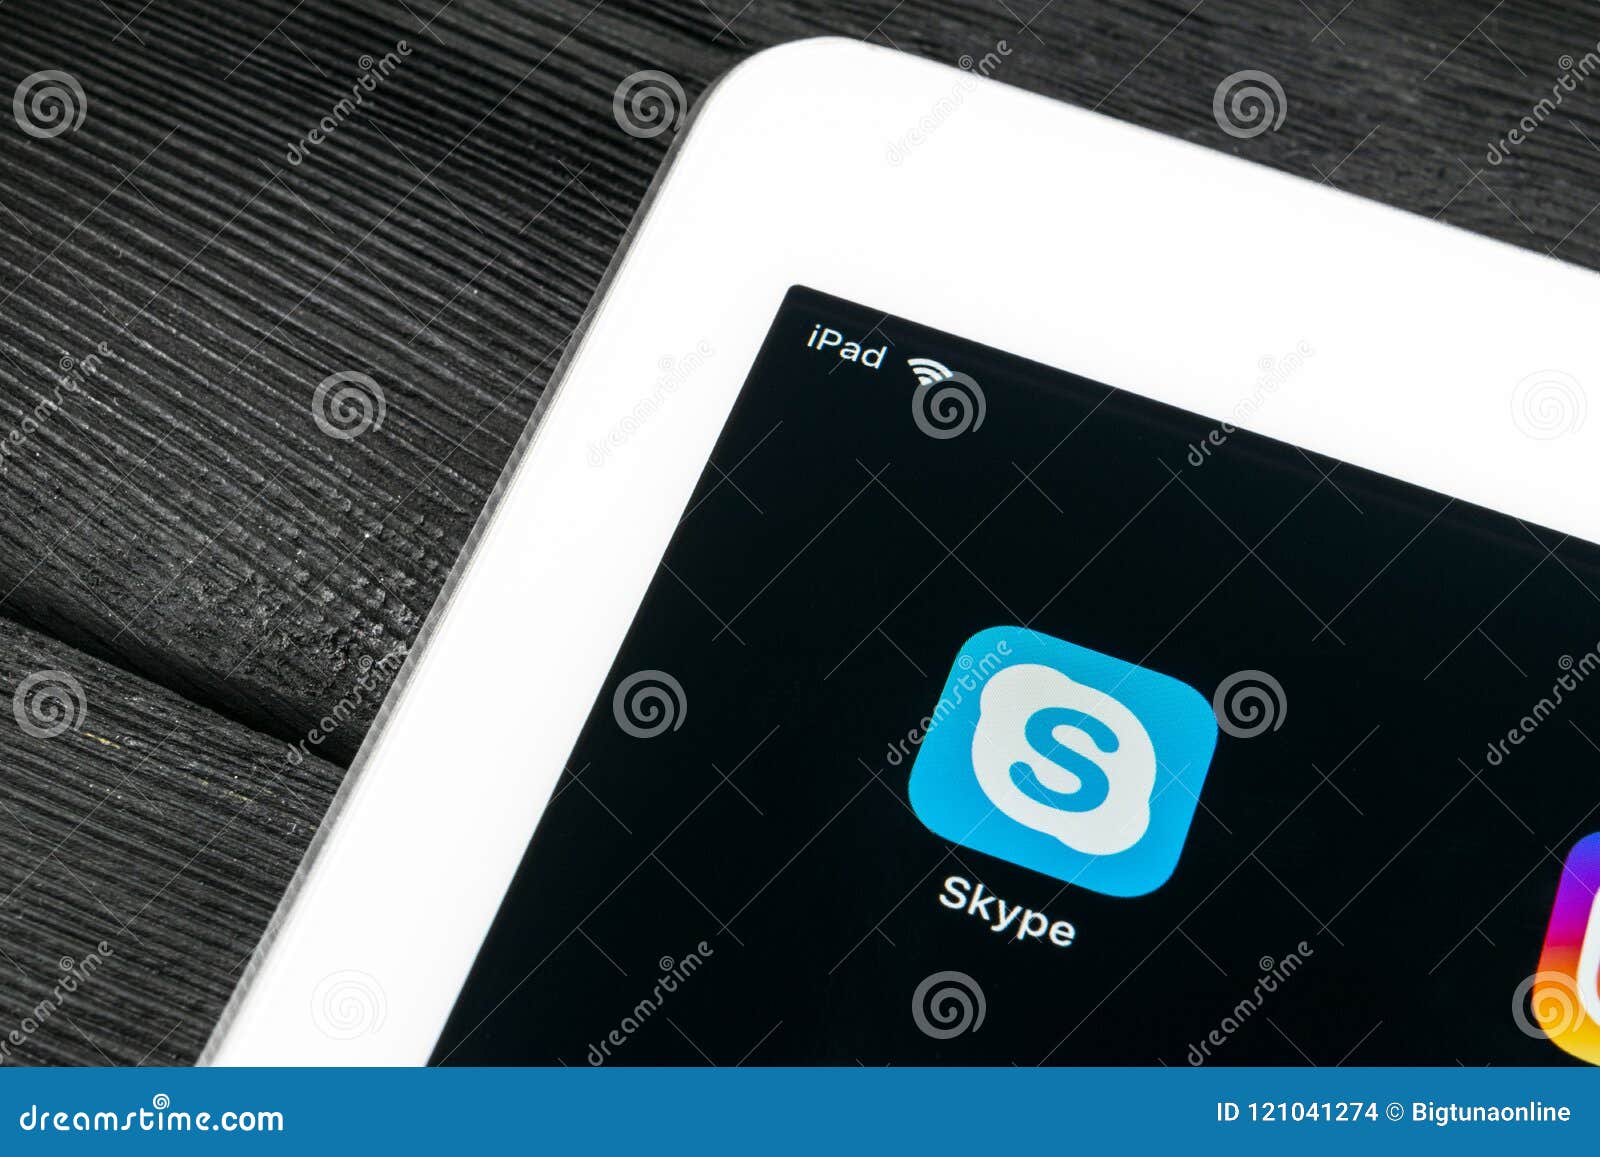 how to close skype app on pc